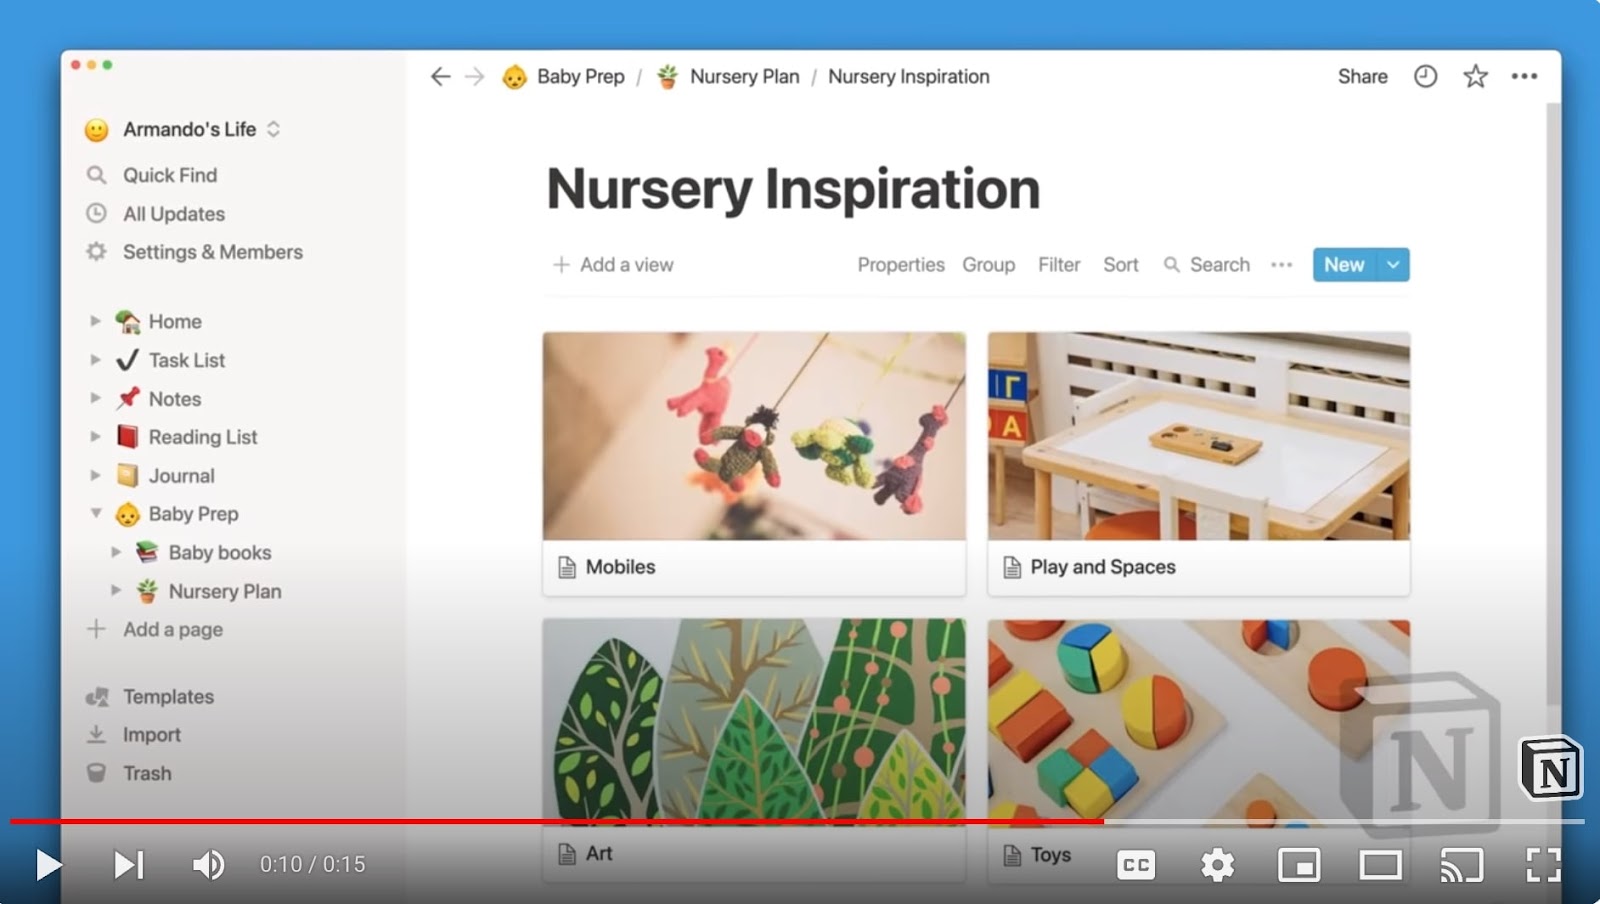 "Nursery Inspiration" section from the Notion's ad